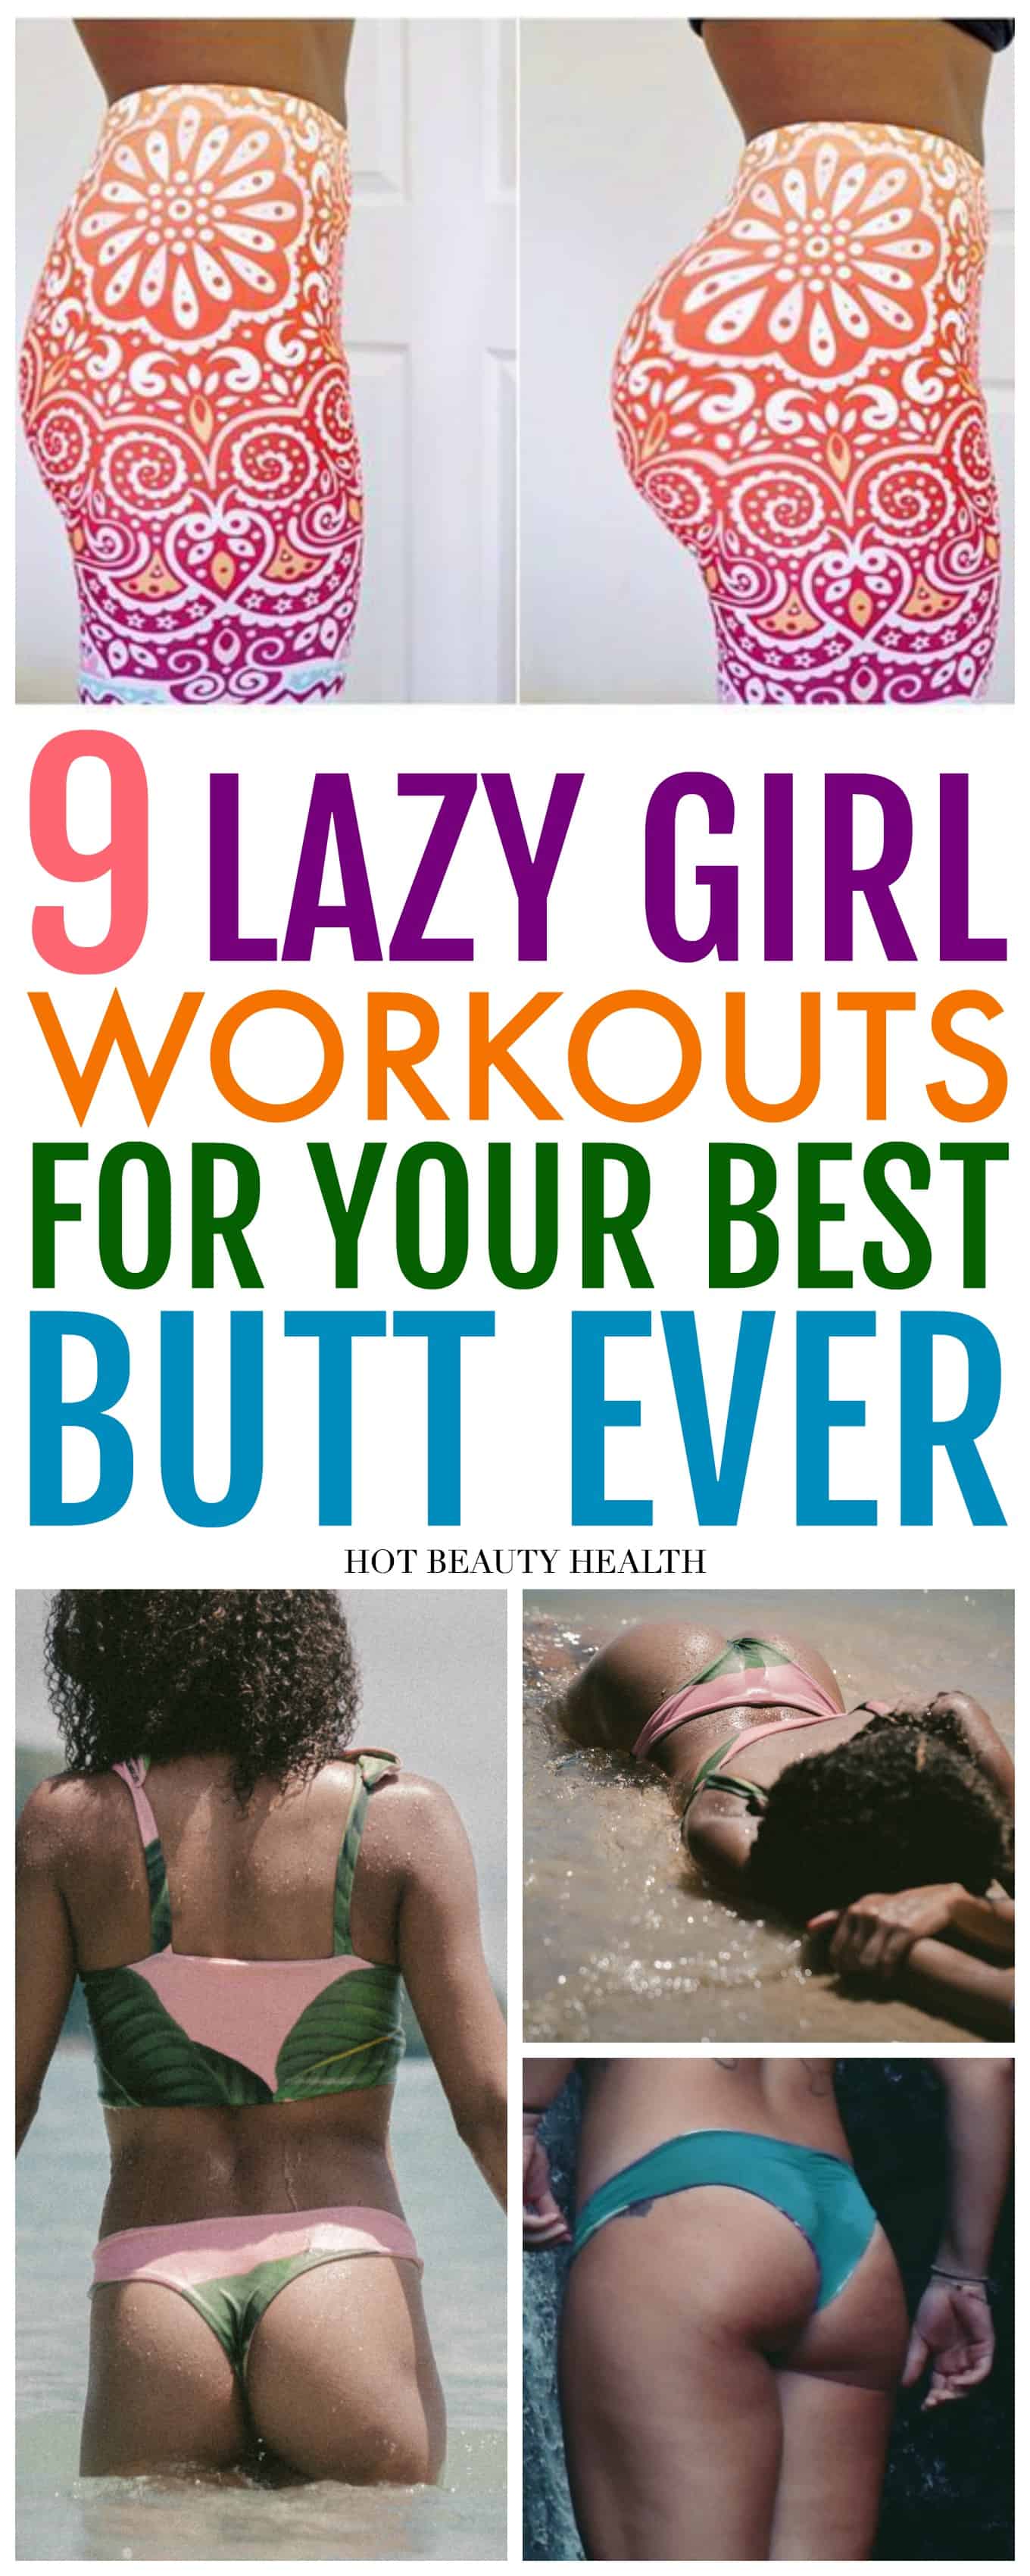 Workouts to Get a Bubble Butt